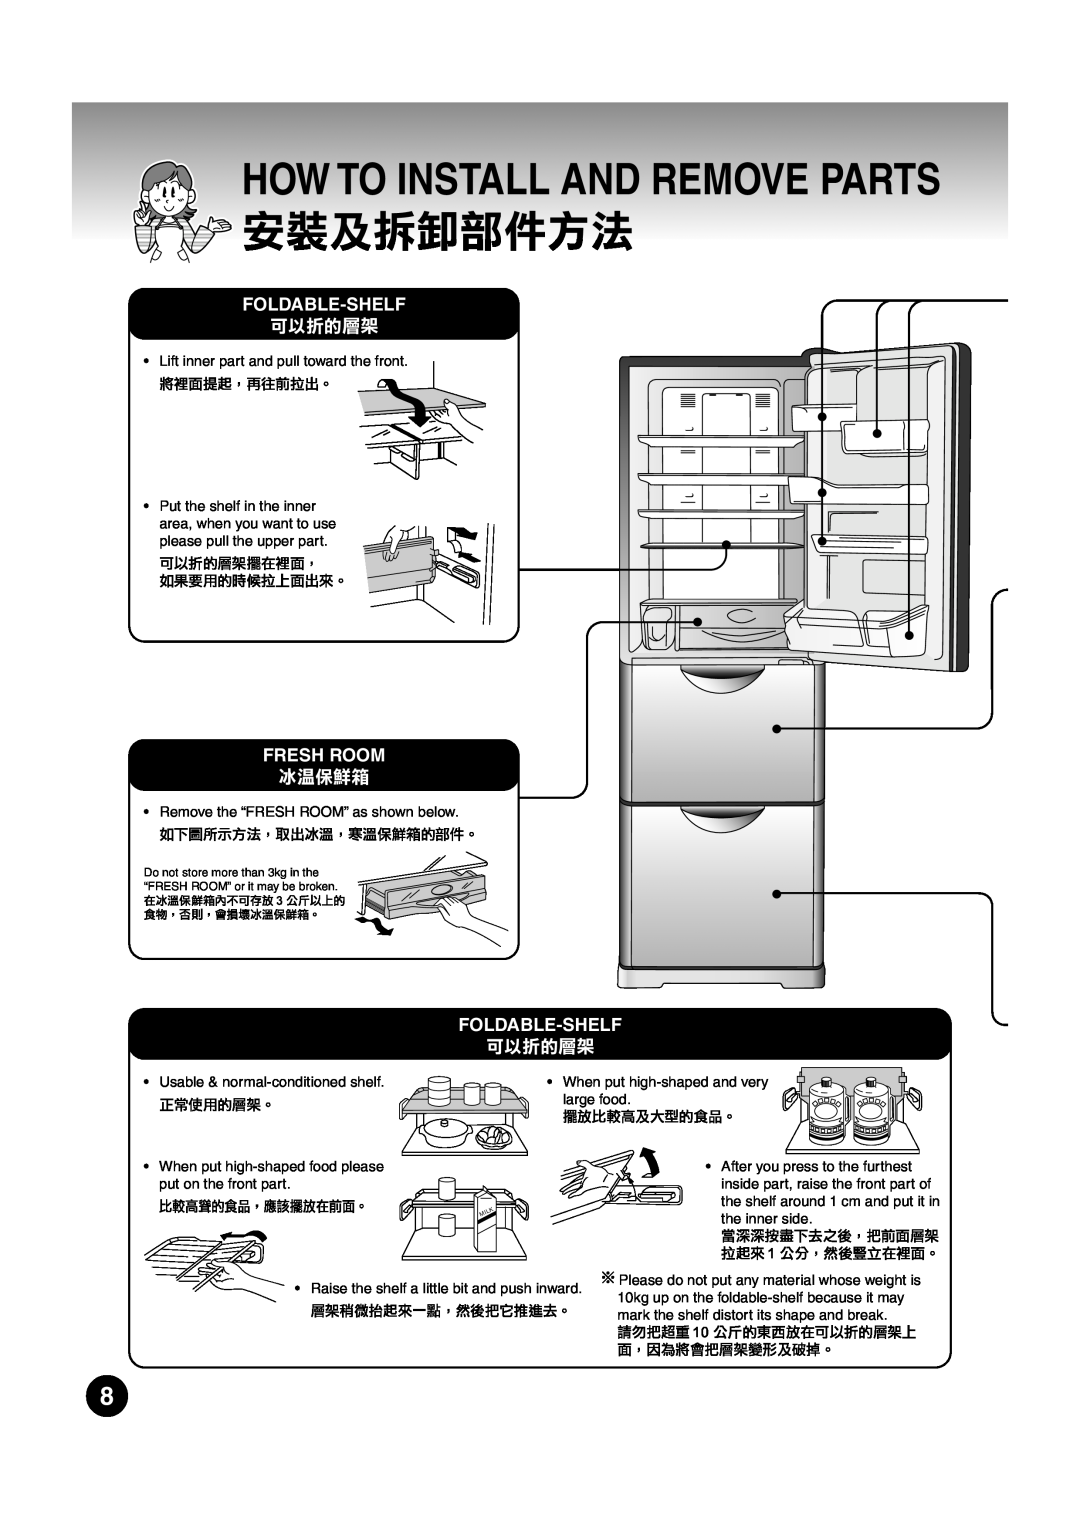 Hitachi R-S37SVH, R-S37SVND, R-S37SVS operation manual How To Install And Remove Parts,  !#$%, Foldable-Shelf, Fresh Room 